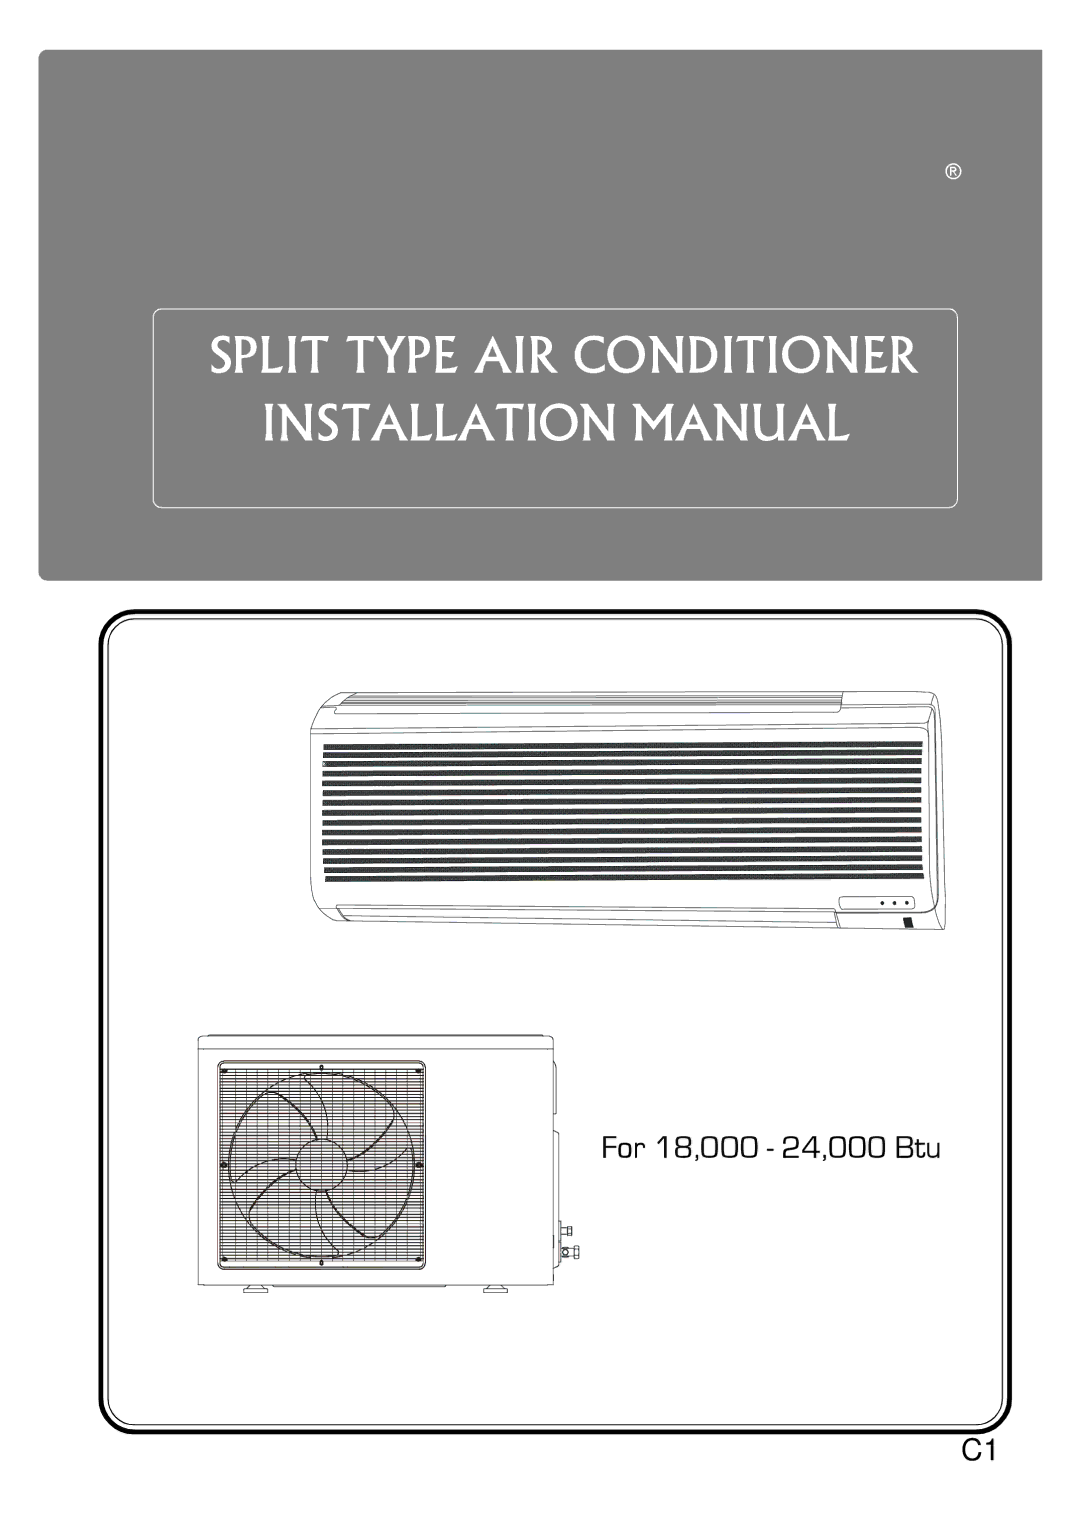 Fedders R407C service manual Split Type AIR Conditioner Installation Manual 